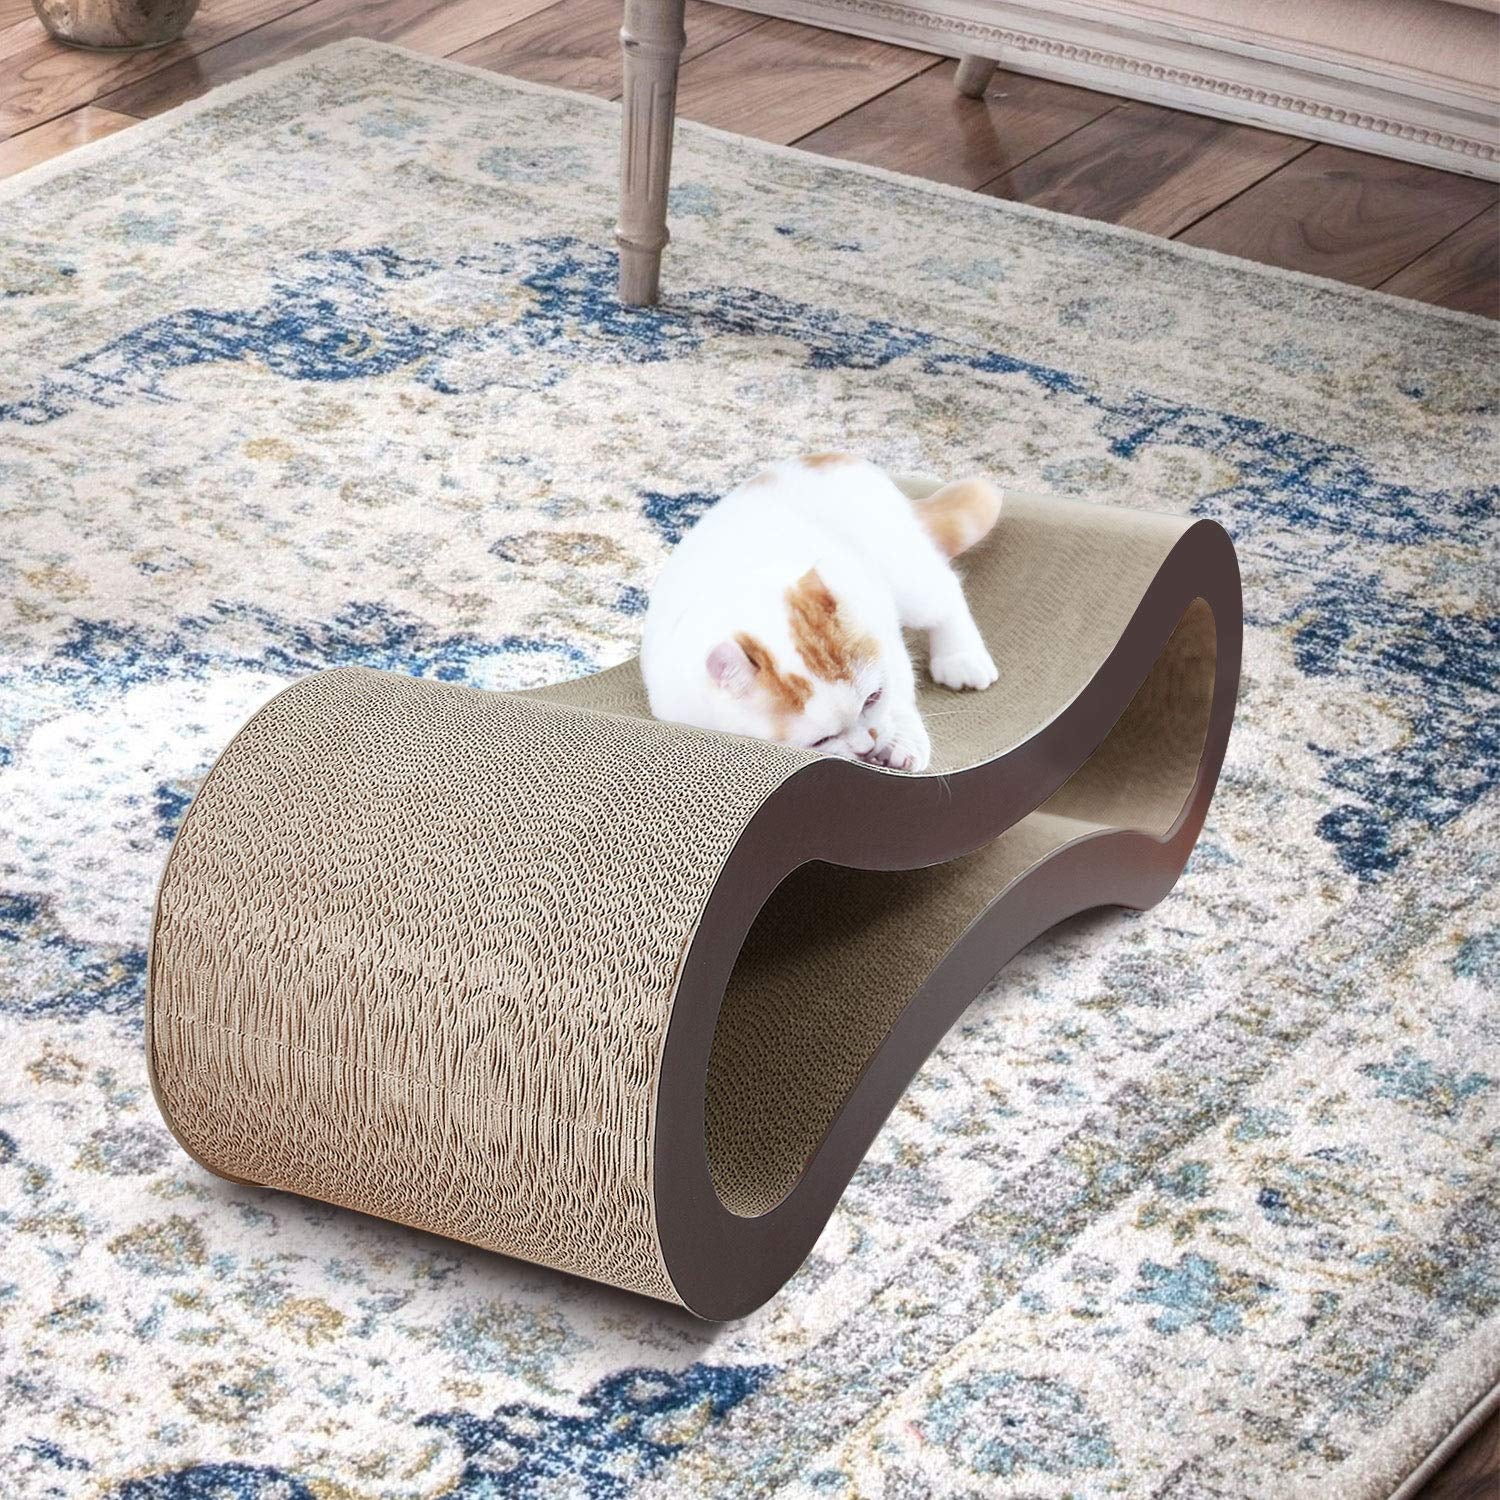 Scratchme Cat Scratcher Board & Post Prevents Furniture Damage & Contains Catnip to Attract Cats, Brown